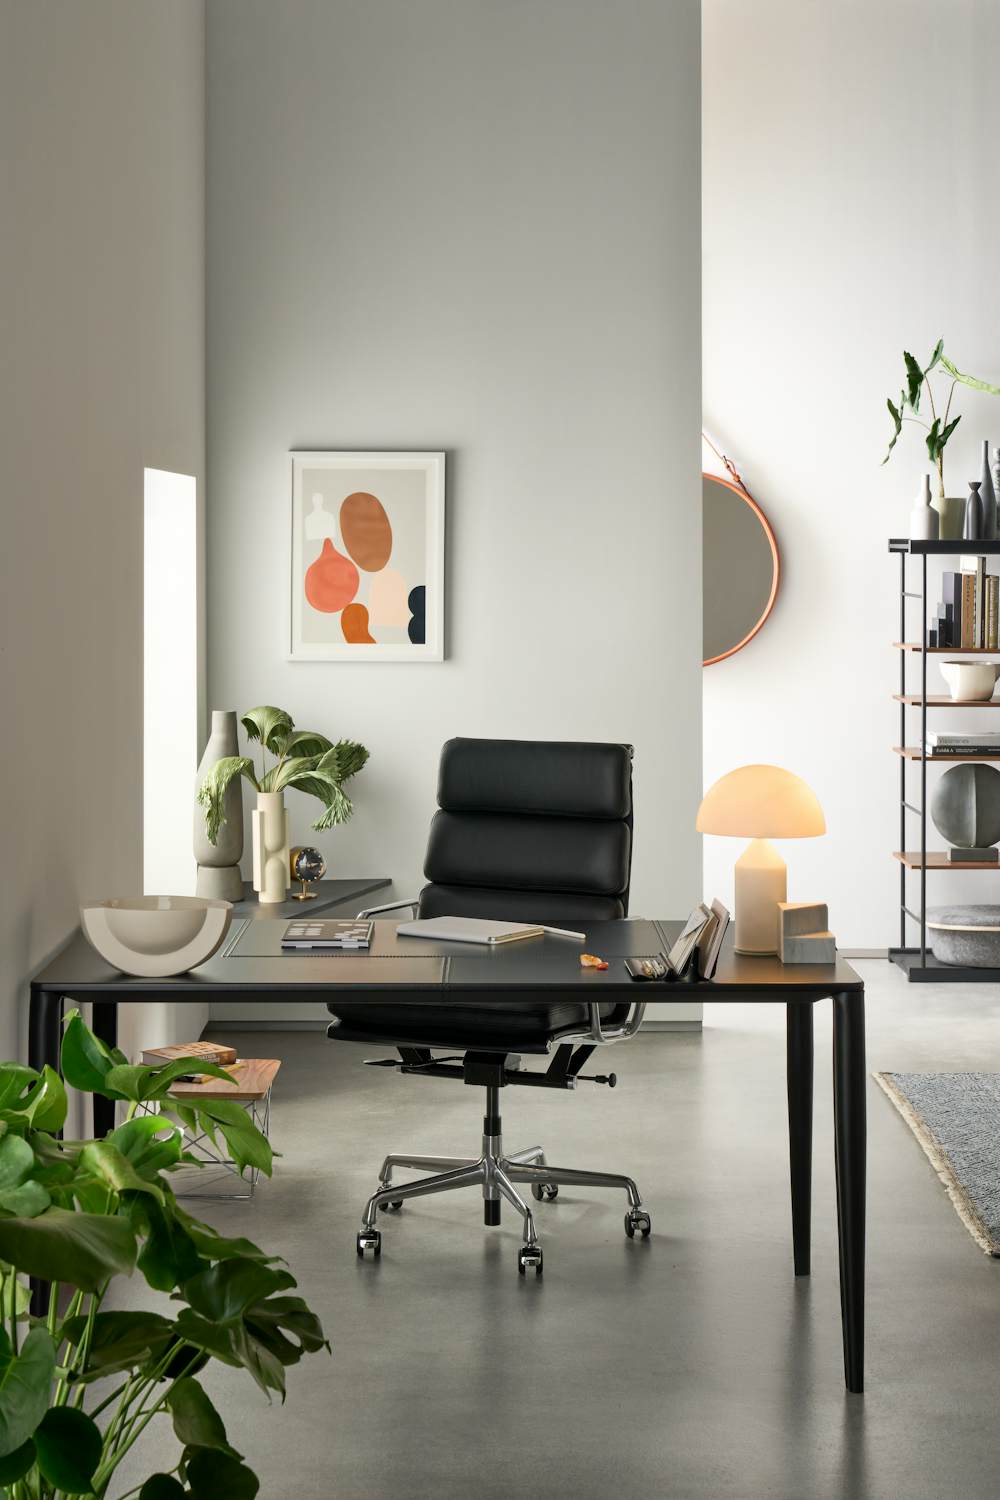 Vella Desk and Soft Pad Executive Chair in a home office setting